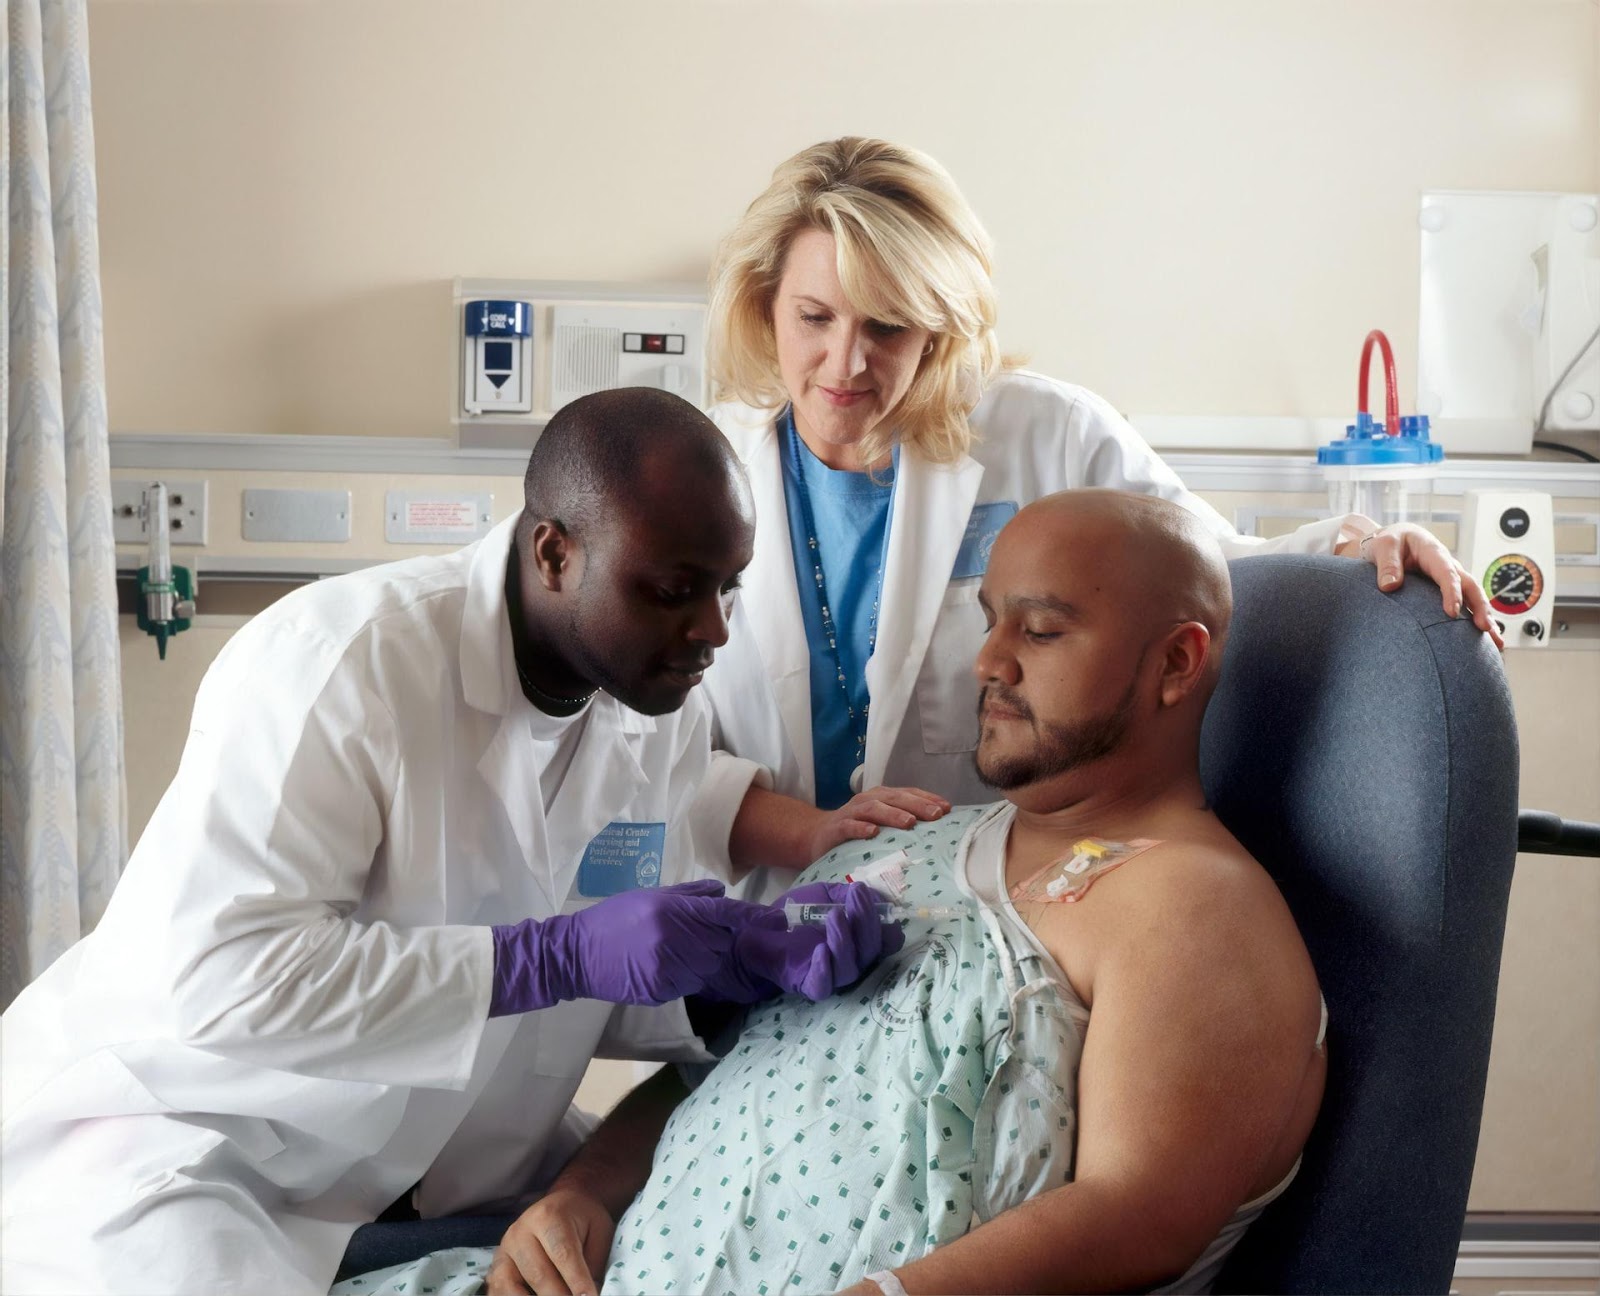 A picture of two physicians working together to help assist a patient in a procedure